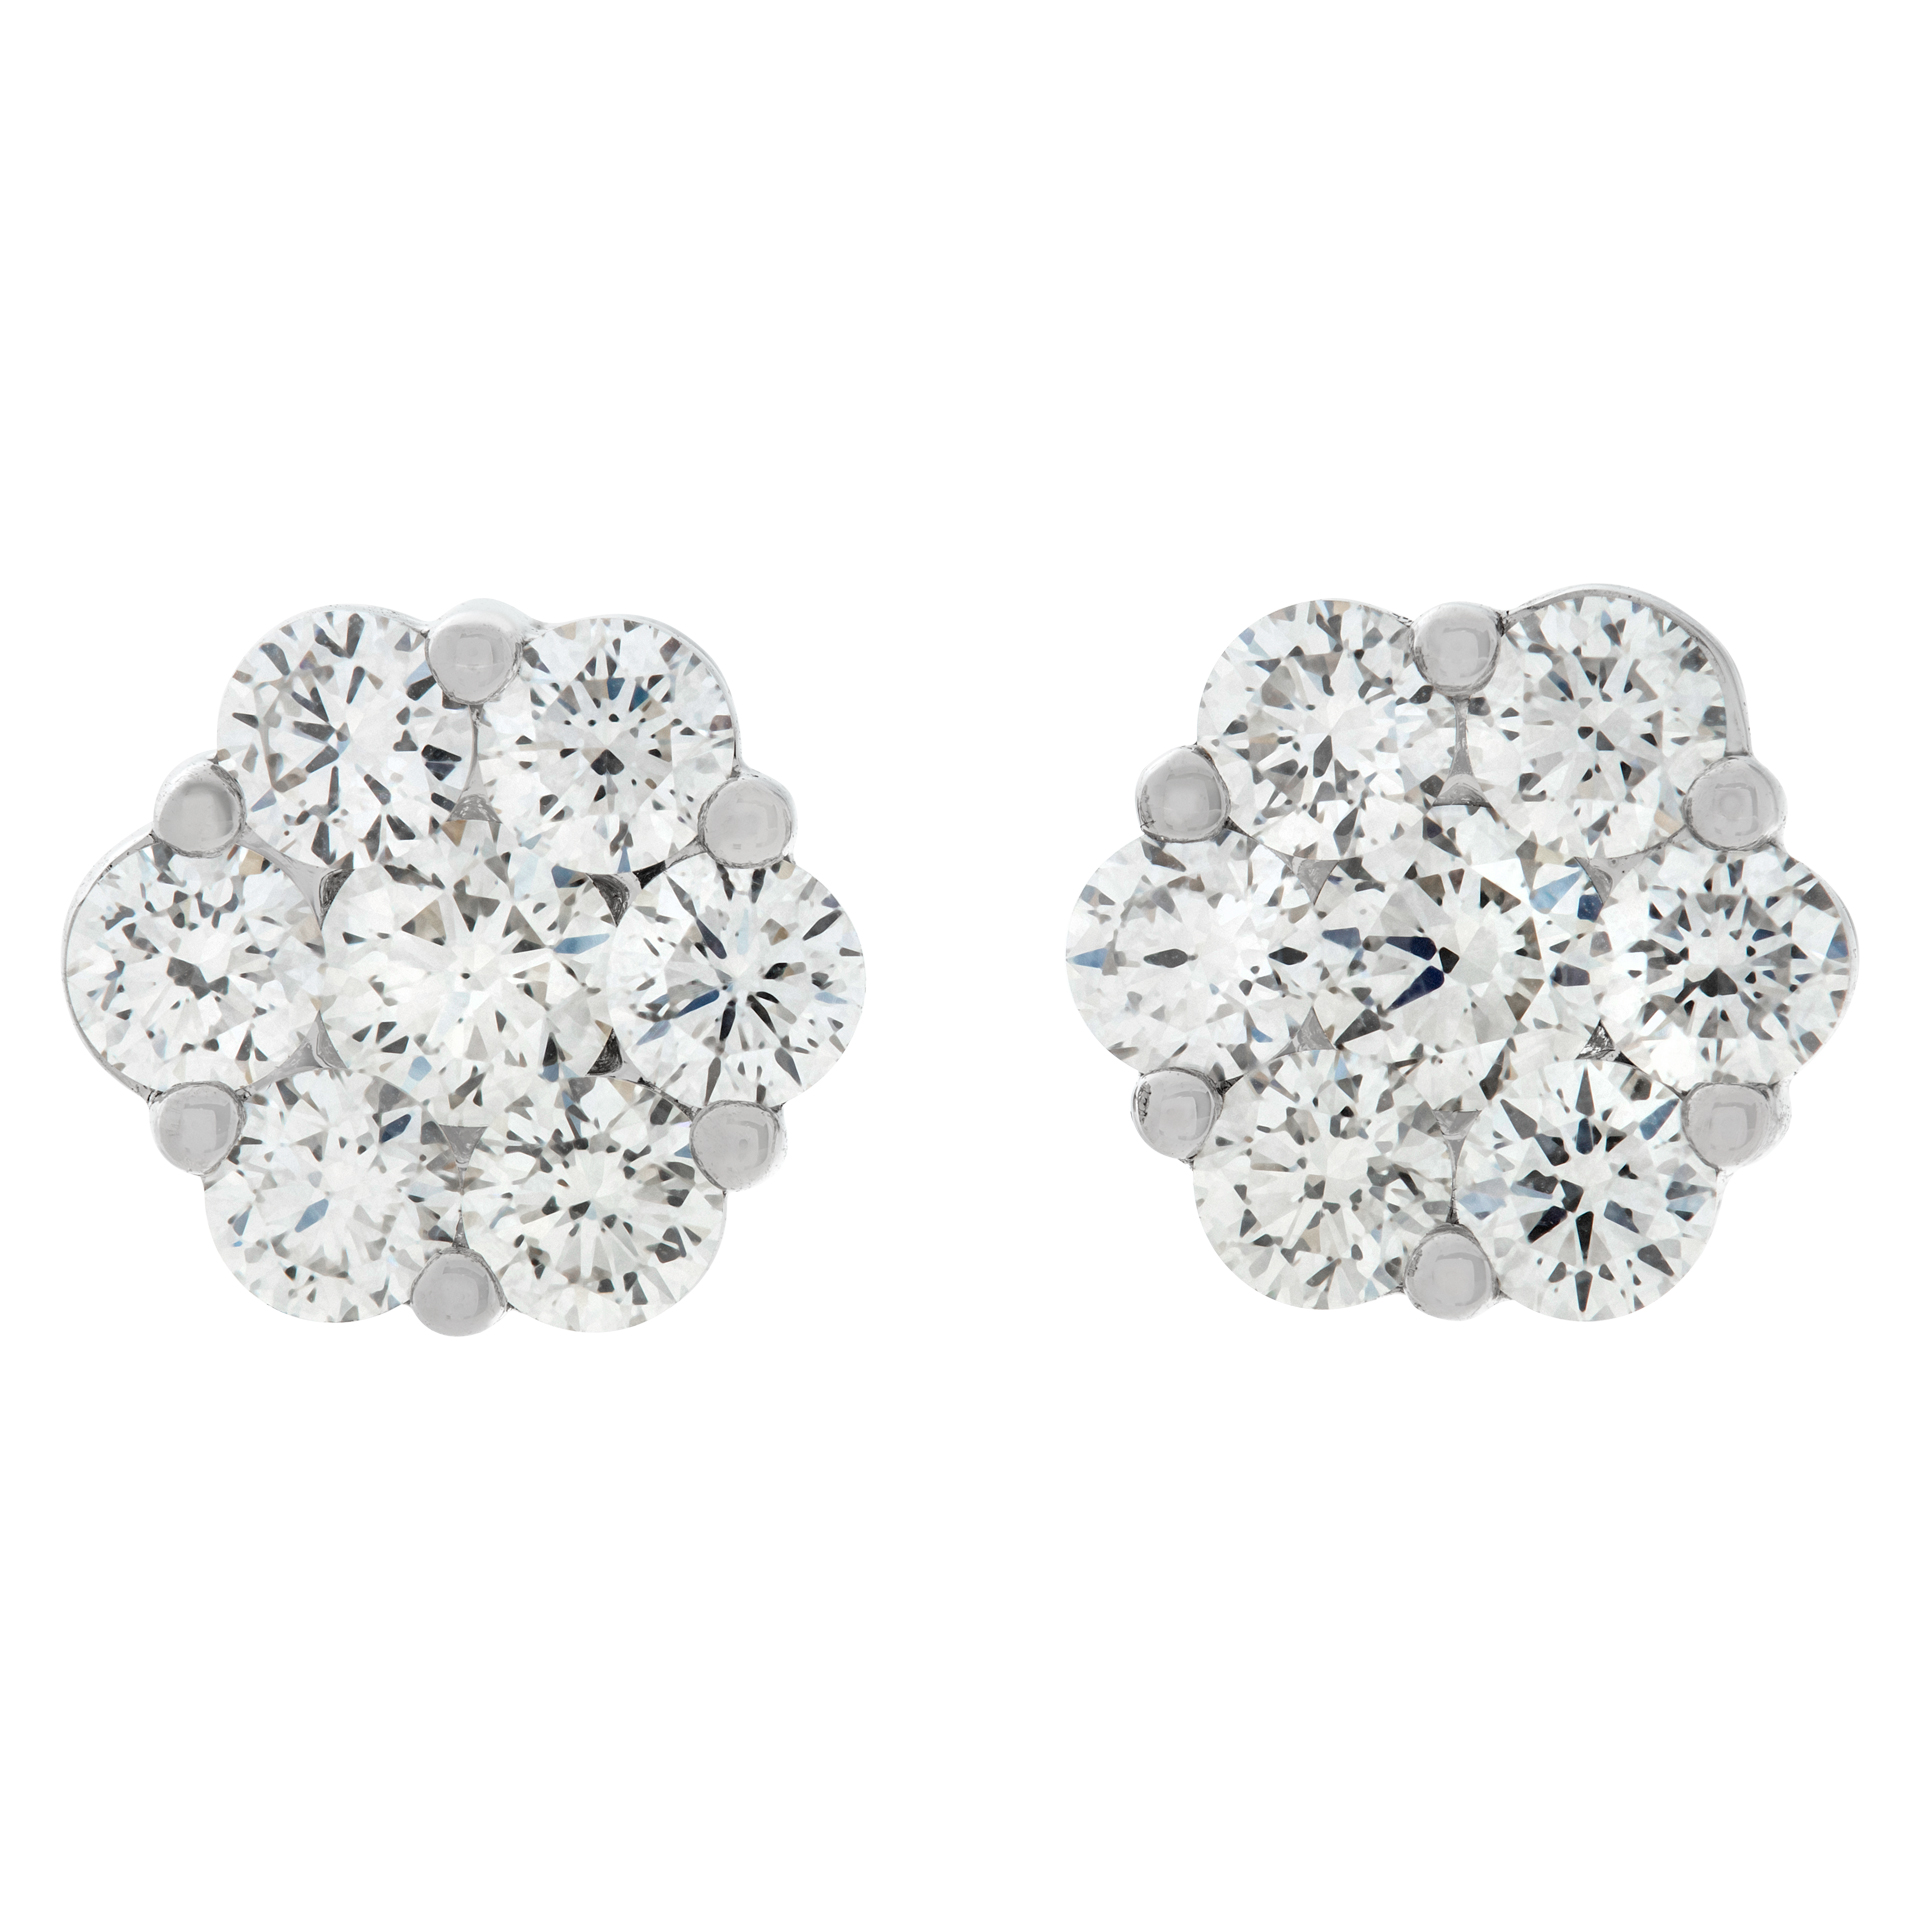 Floral shaped round diamond cluster earrings in 18k white gold w/ 2.49 carats